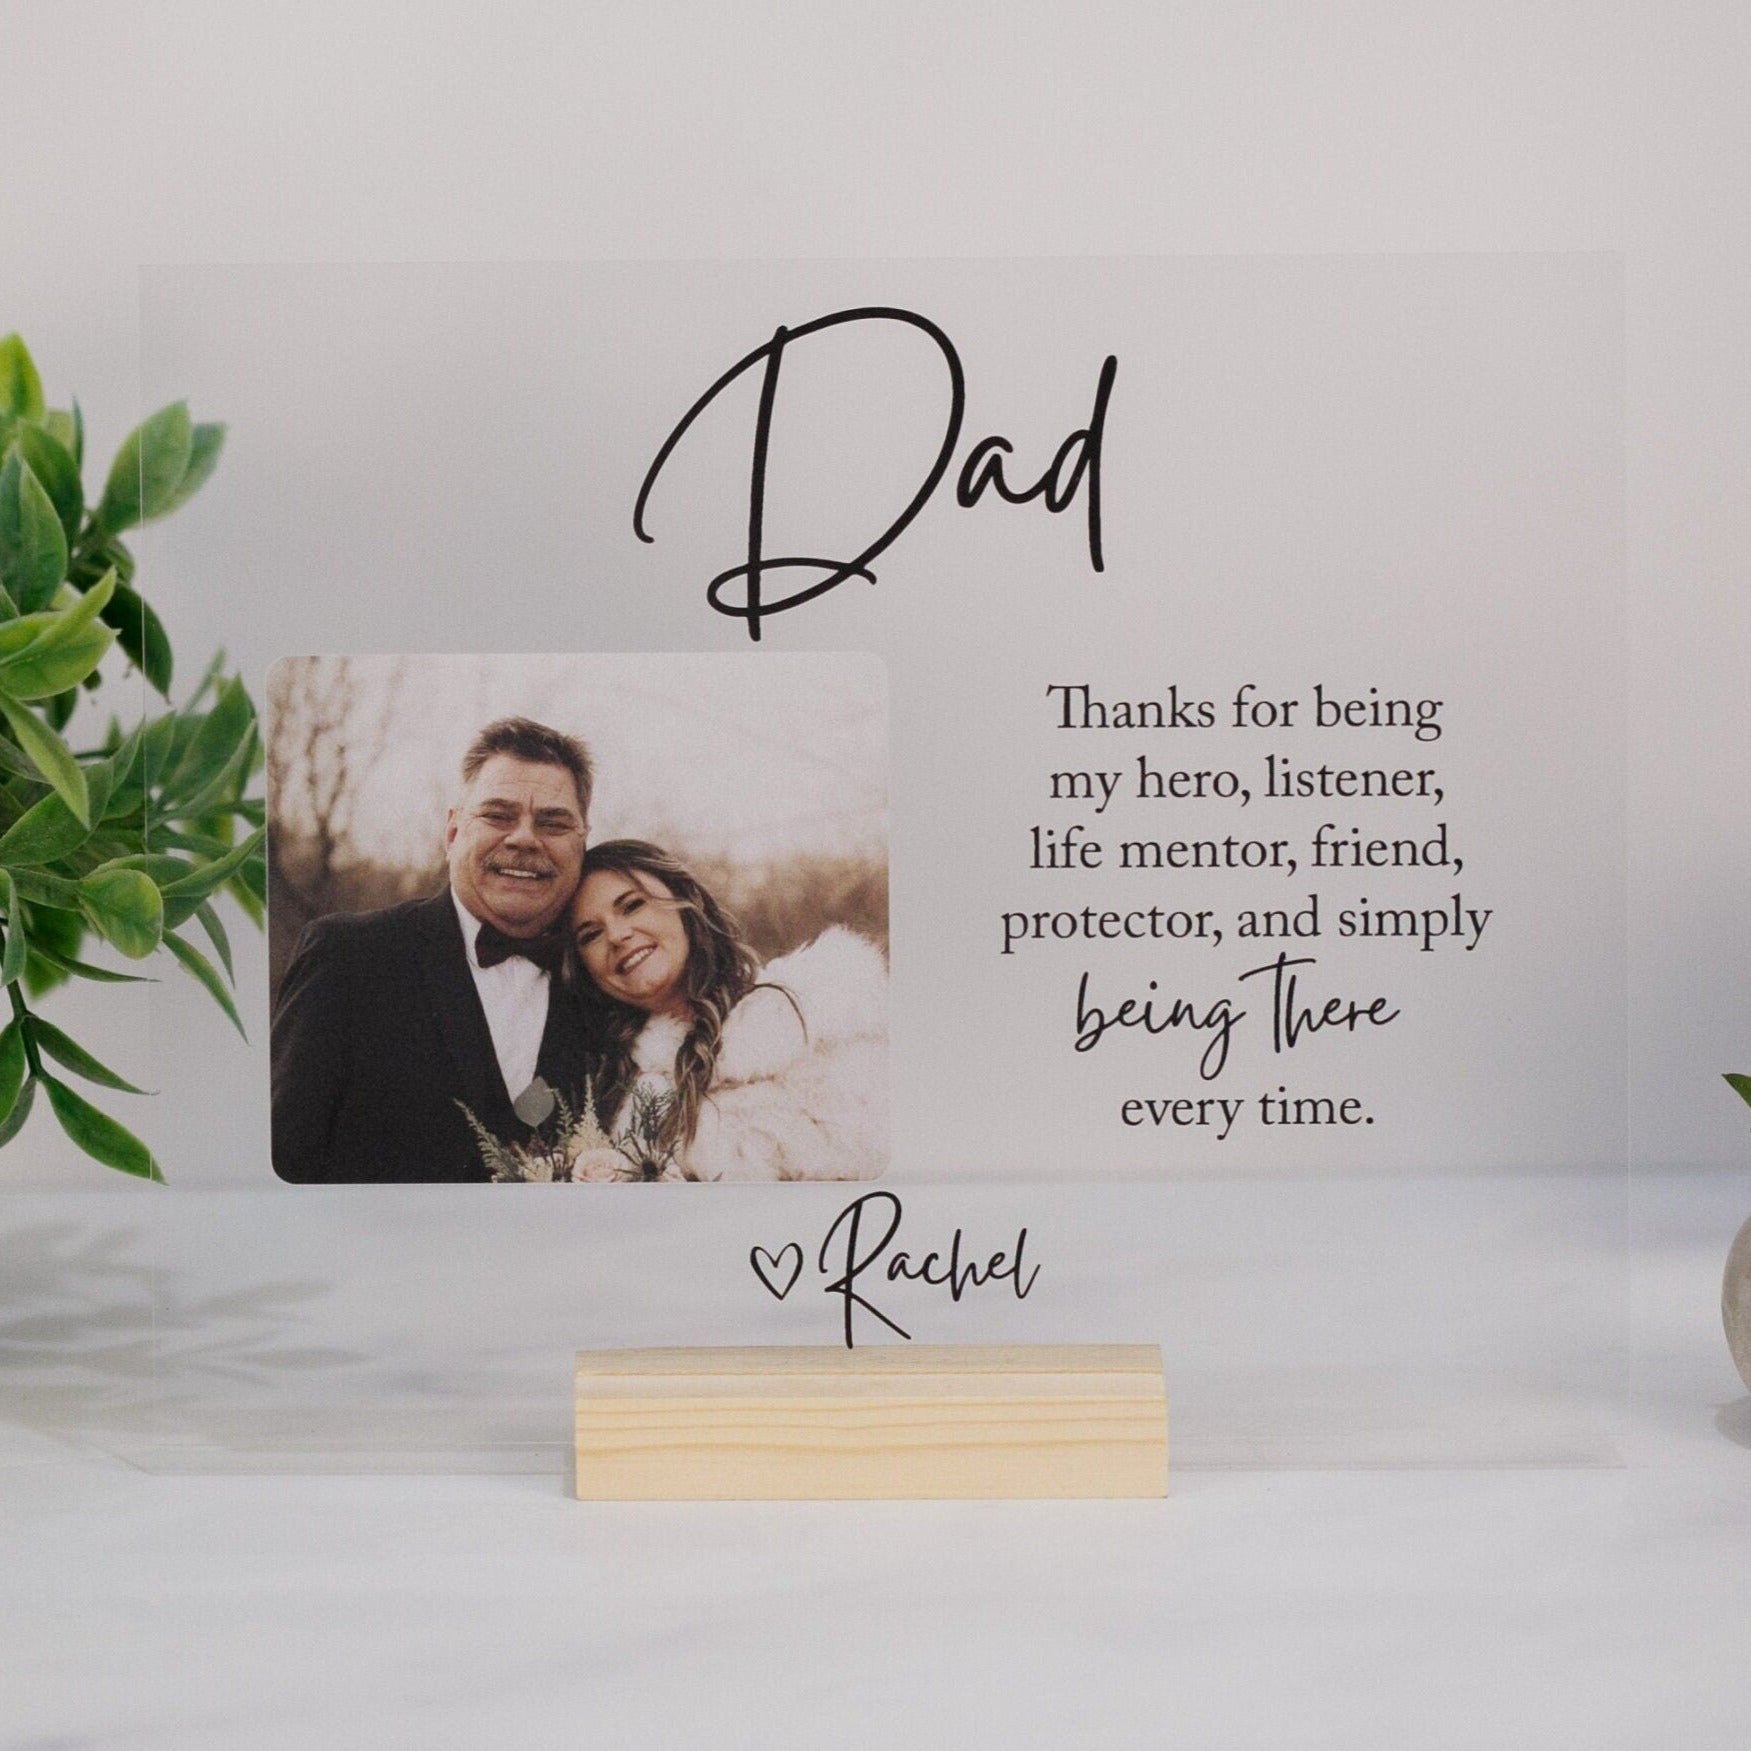 Personalized Dad Thank You Gift, Father of the Bride From Daughter on Wedding Day, Custom Photo Portrait Acrylic Birthday Present for Dad